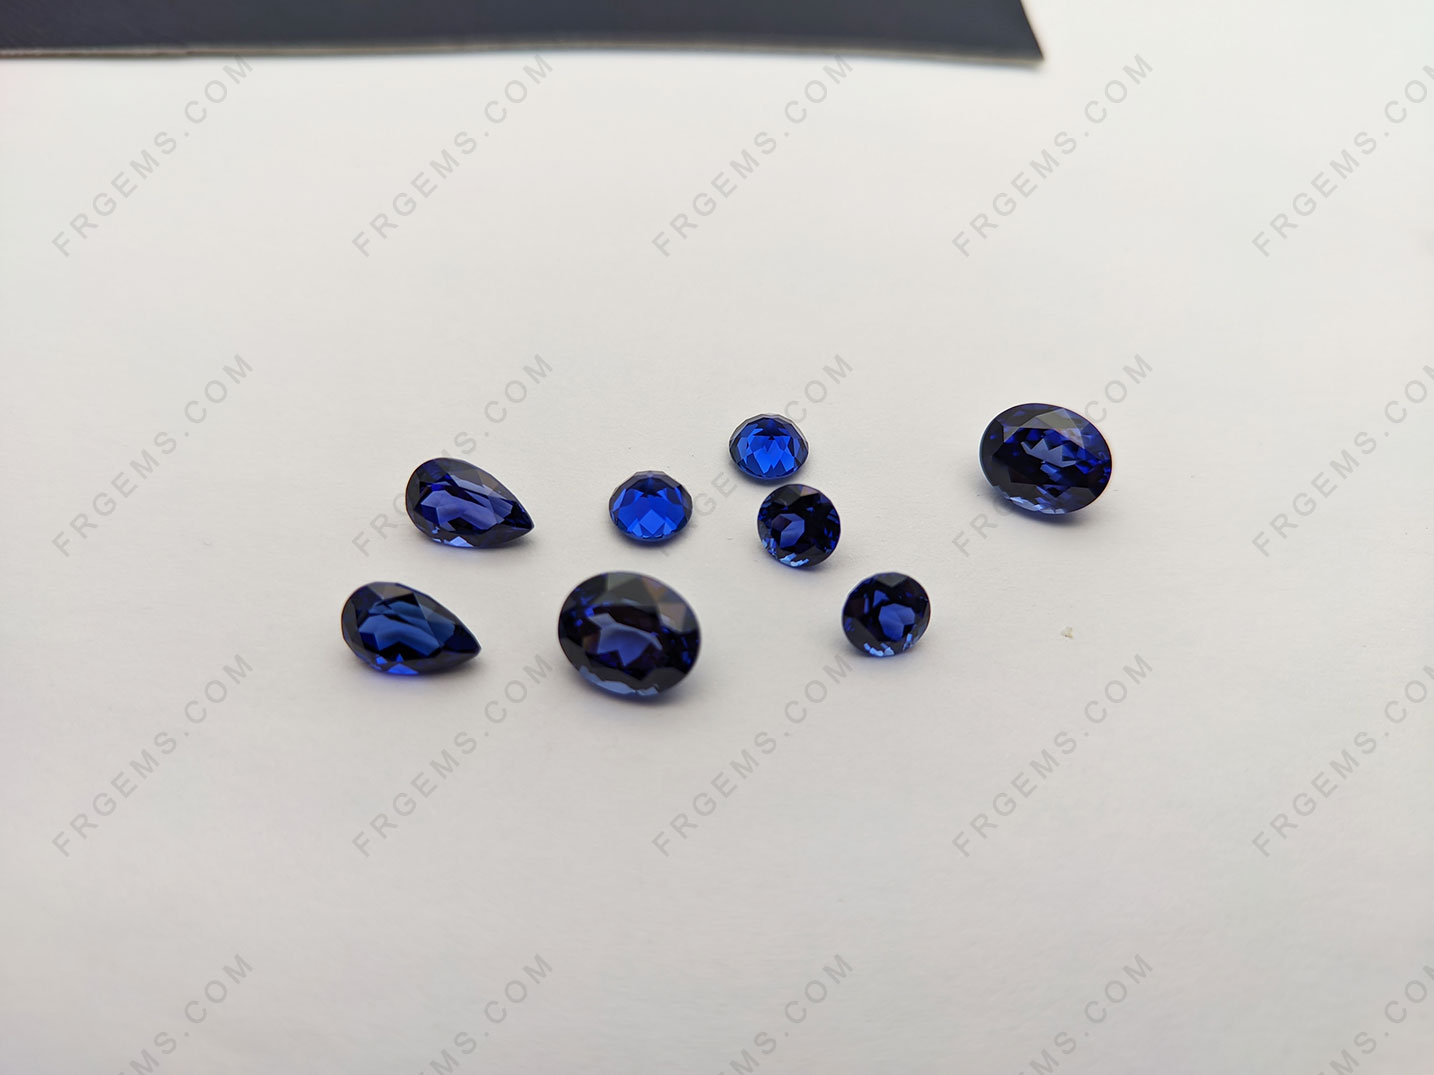 Lab Grown Pulled Czochralski Royal Blue Sapphire Color Pear Shaped Faceted cut Gemstone